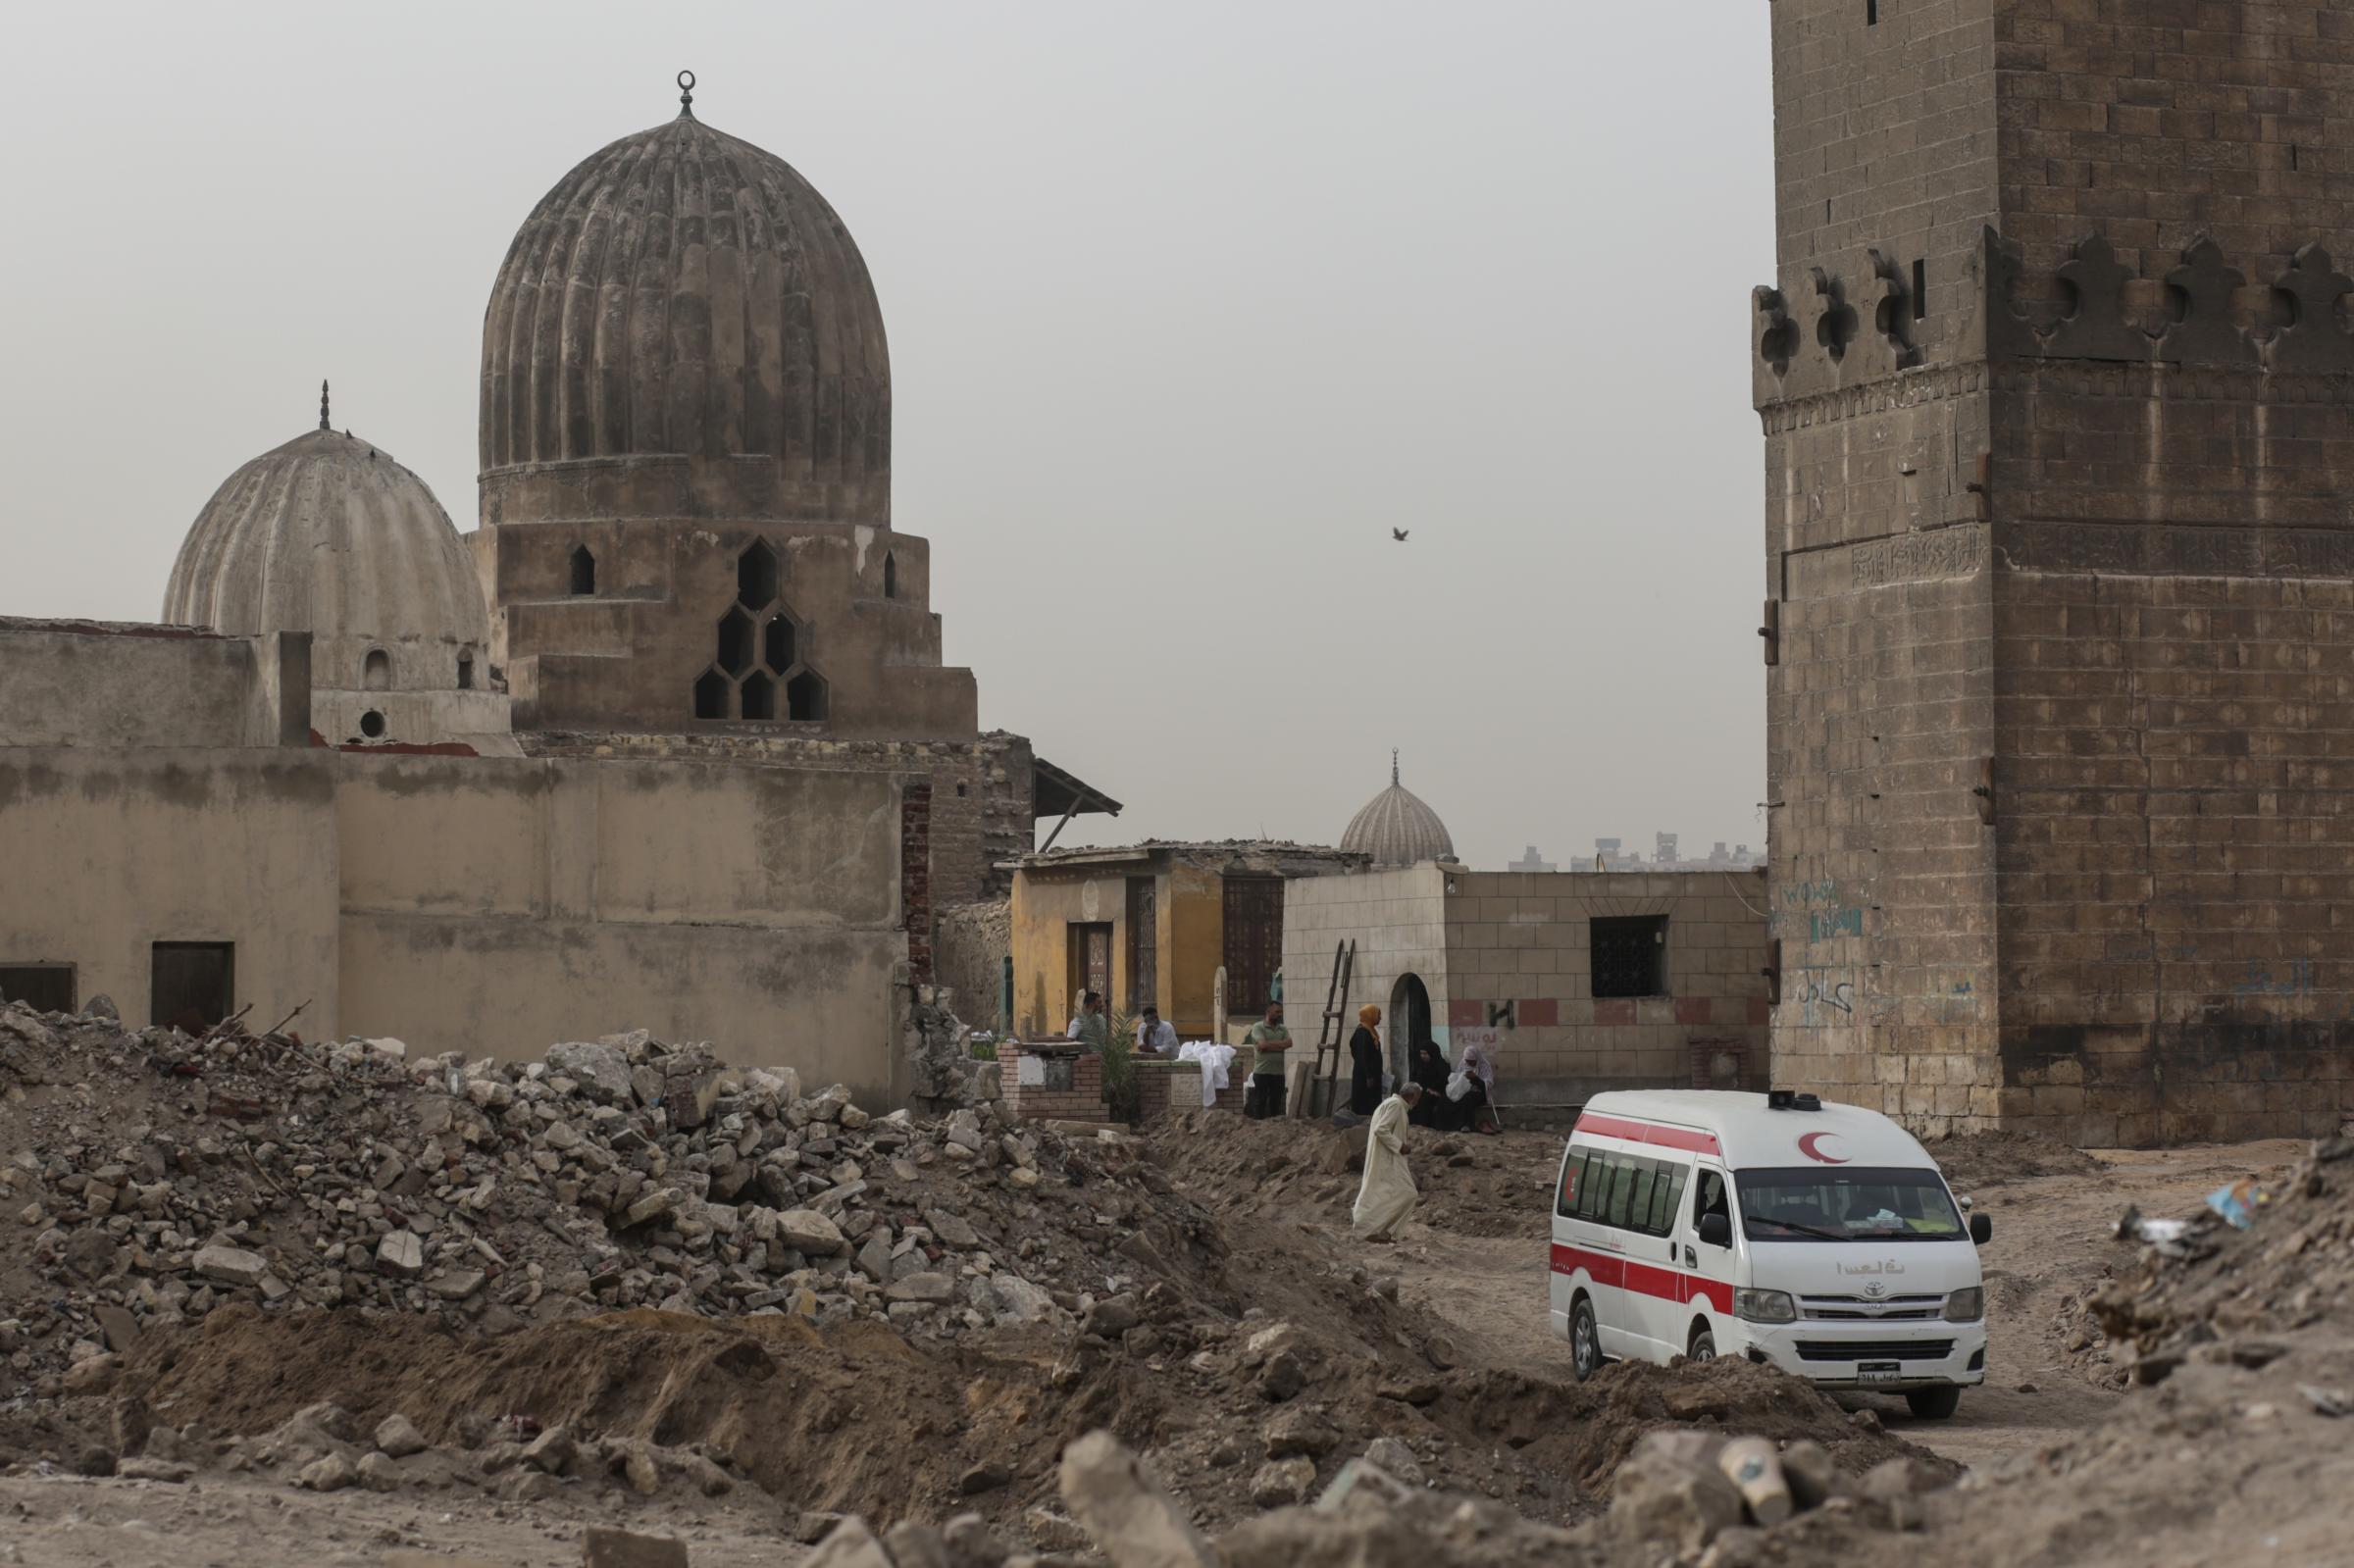 Bulldozers tear into Cairo's historic Islamic cemeteries - A family carries in an ambulance the exhumed remains of...